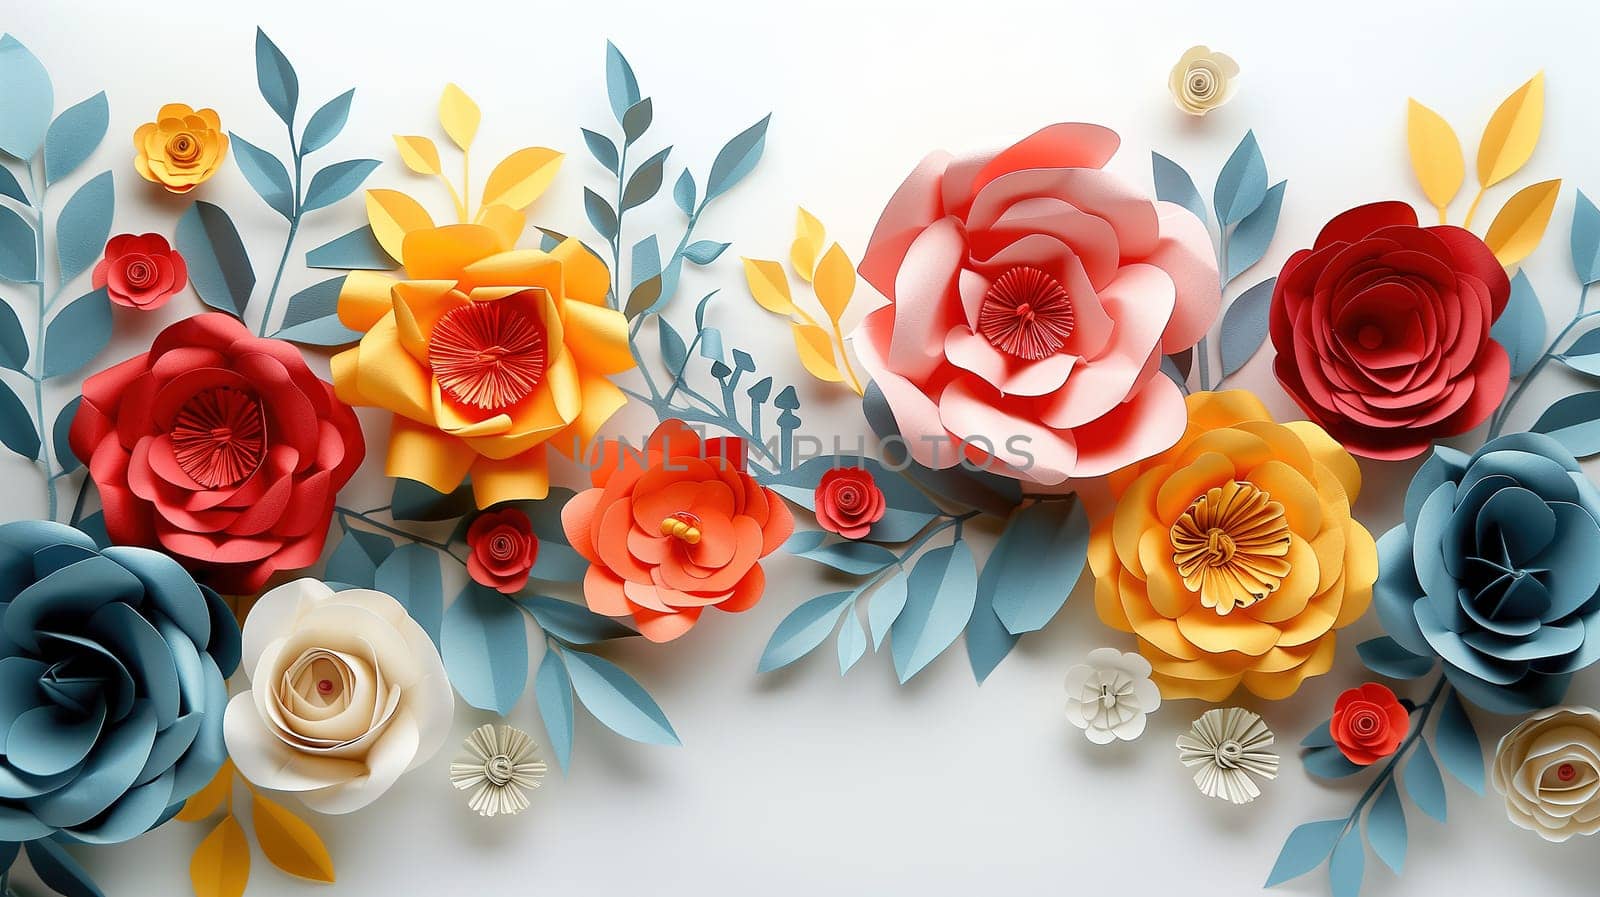 Paper Flowers Arranged on White Surface by TRMK